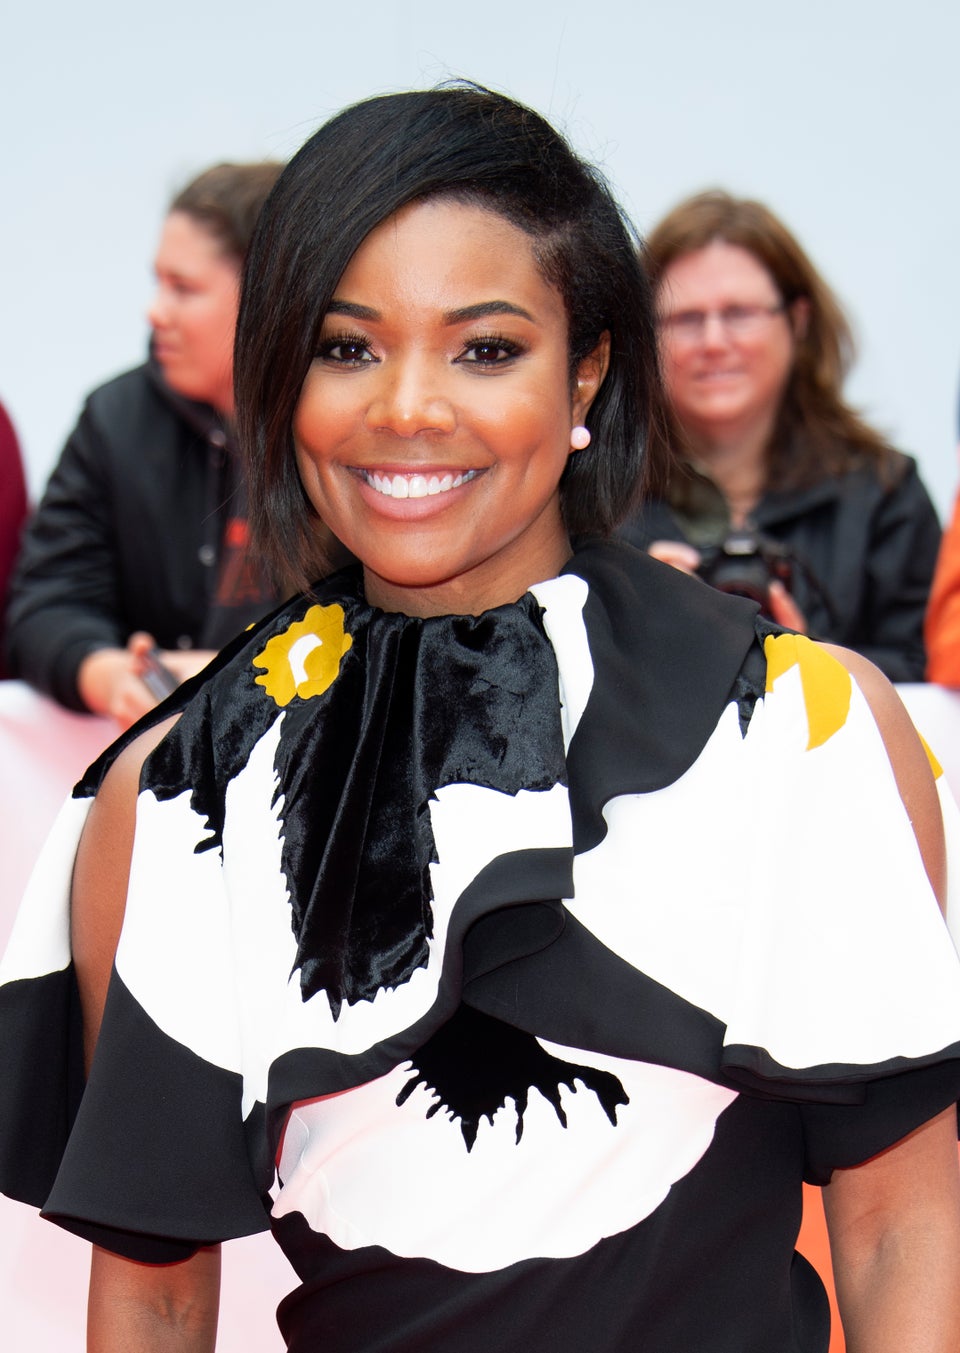 Gabrielle Union To Produce and Star In Adaptation Of Bestselling Novel ‘The Perfect Find’